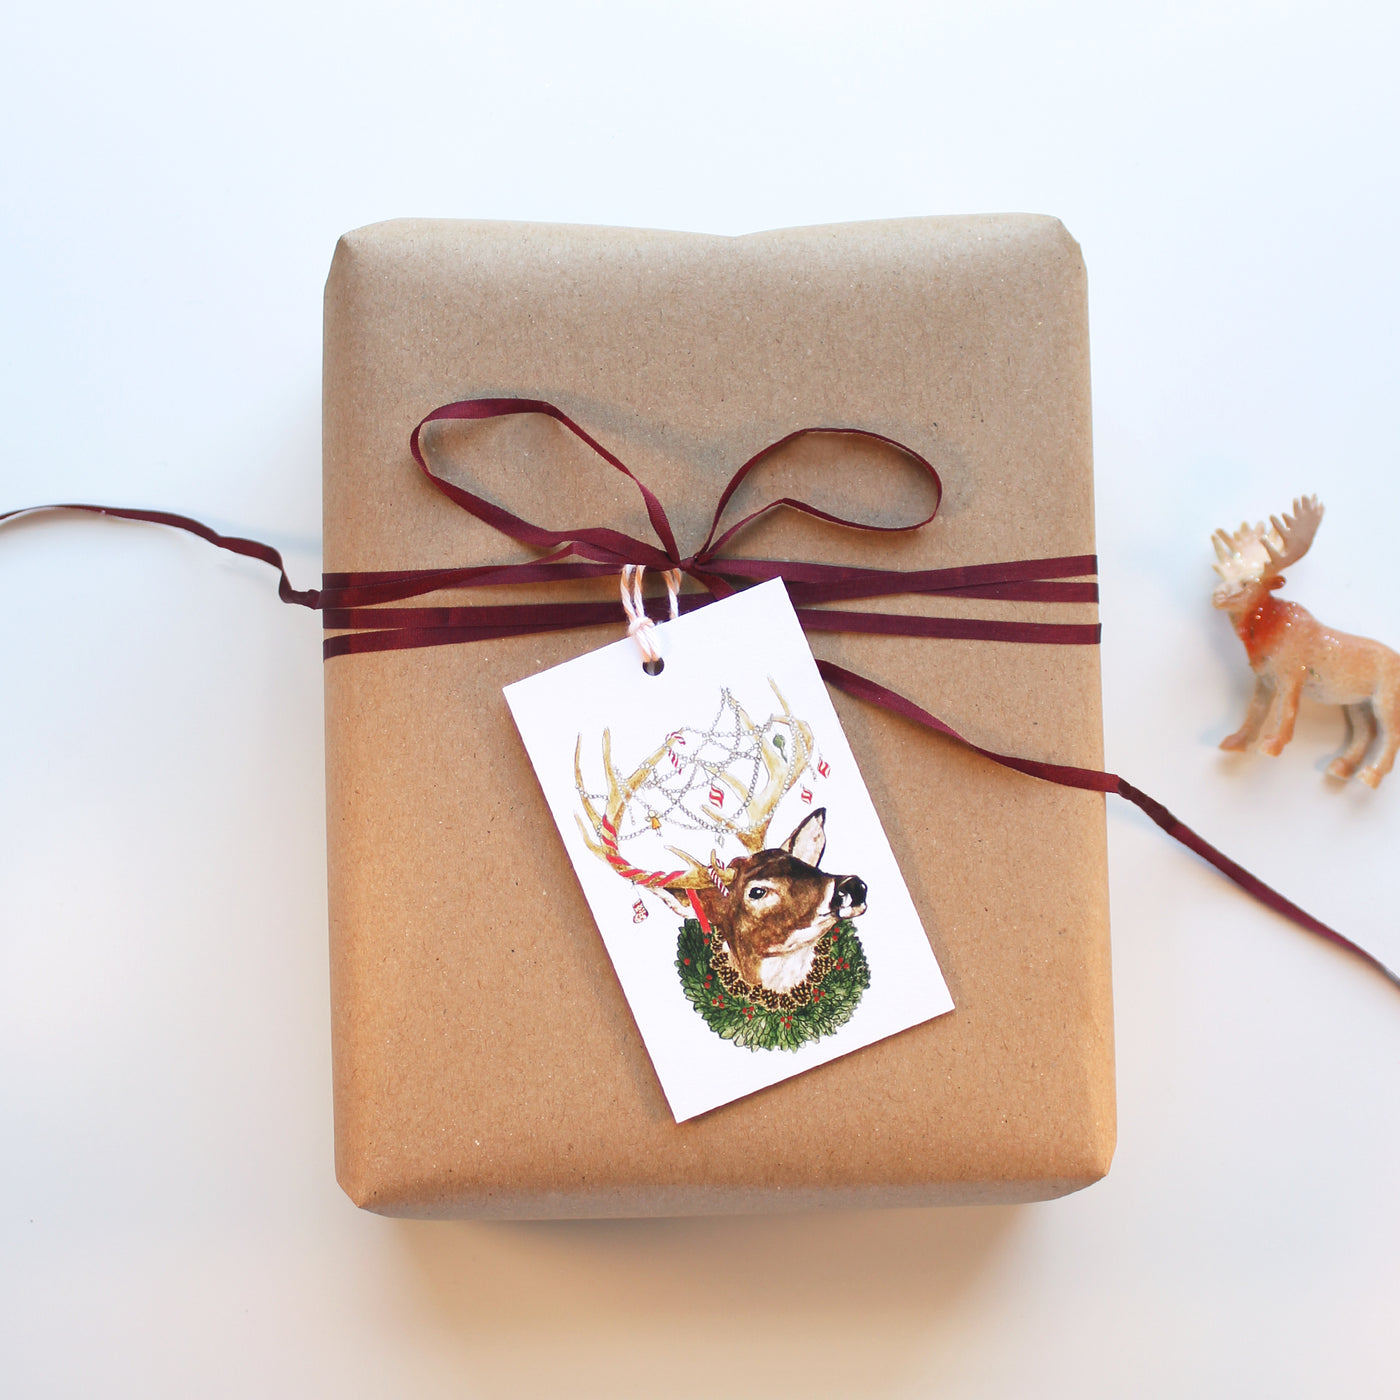 Reindeer Gift Tag on a gift box